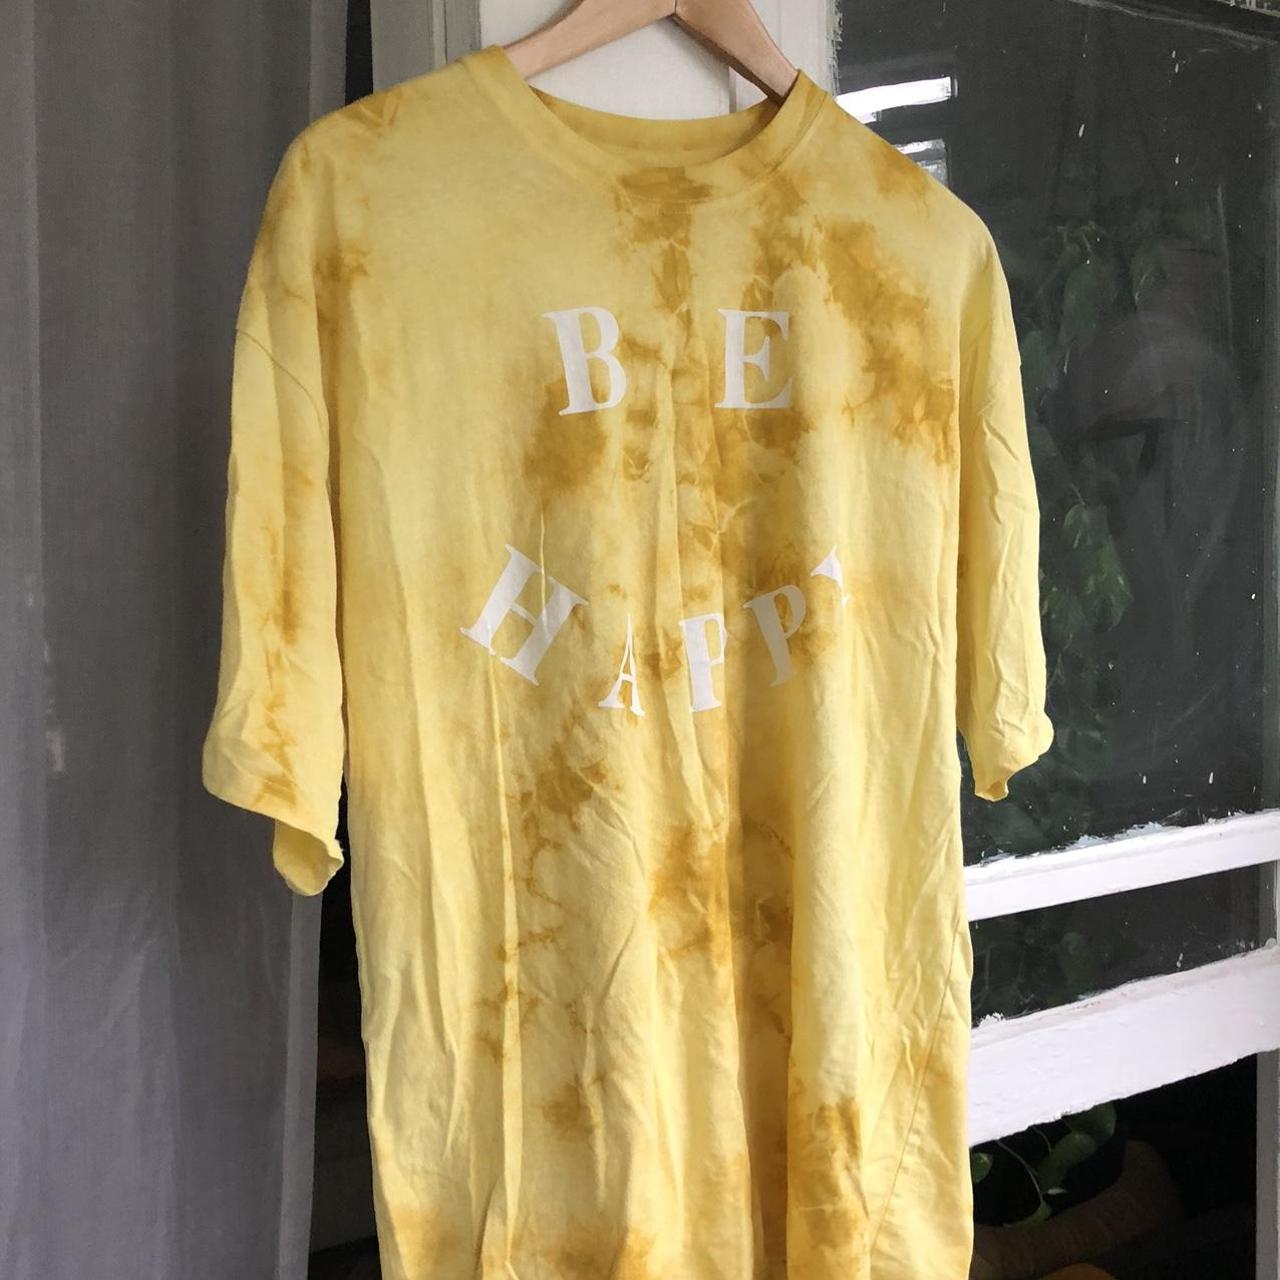 Product Image 1 - Incredibly soft yellow tie dye